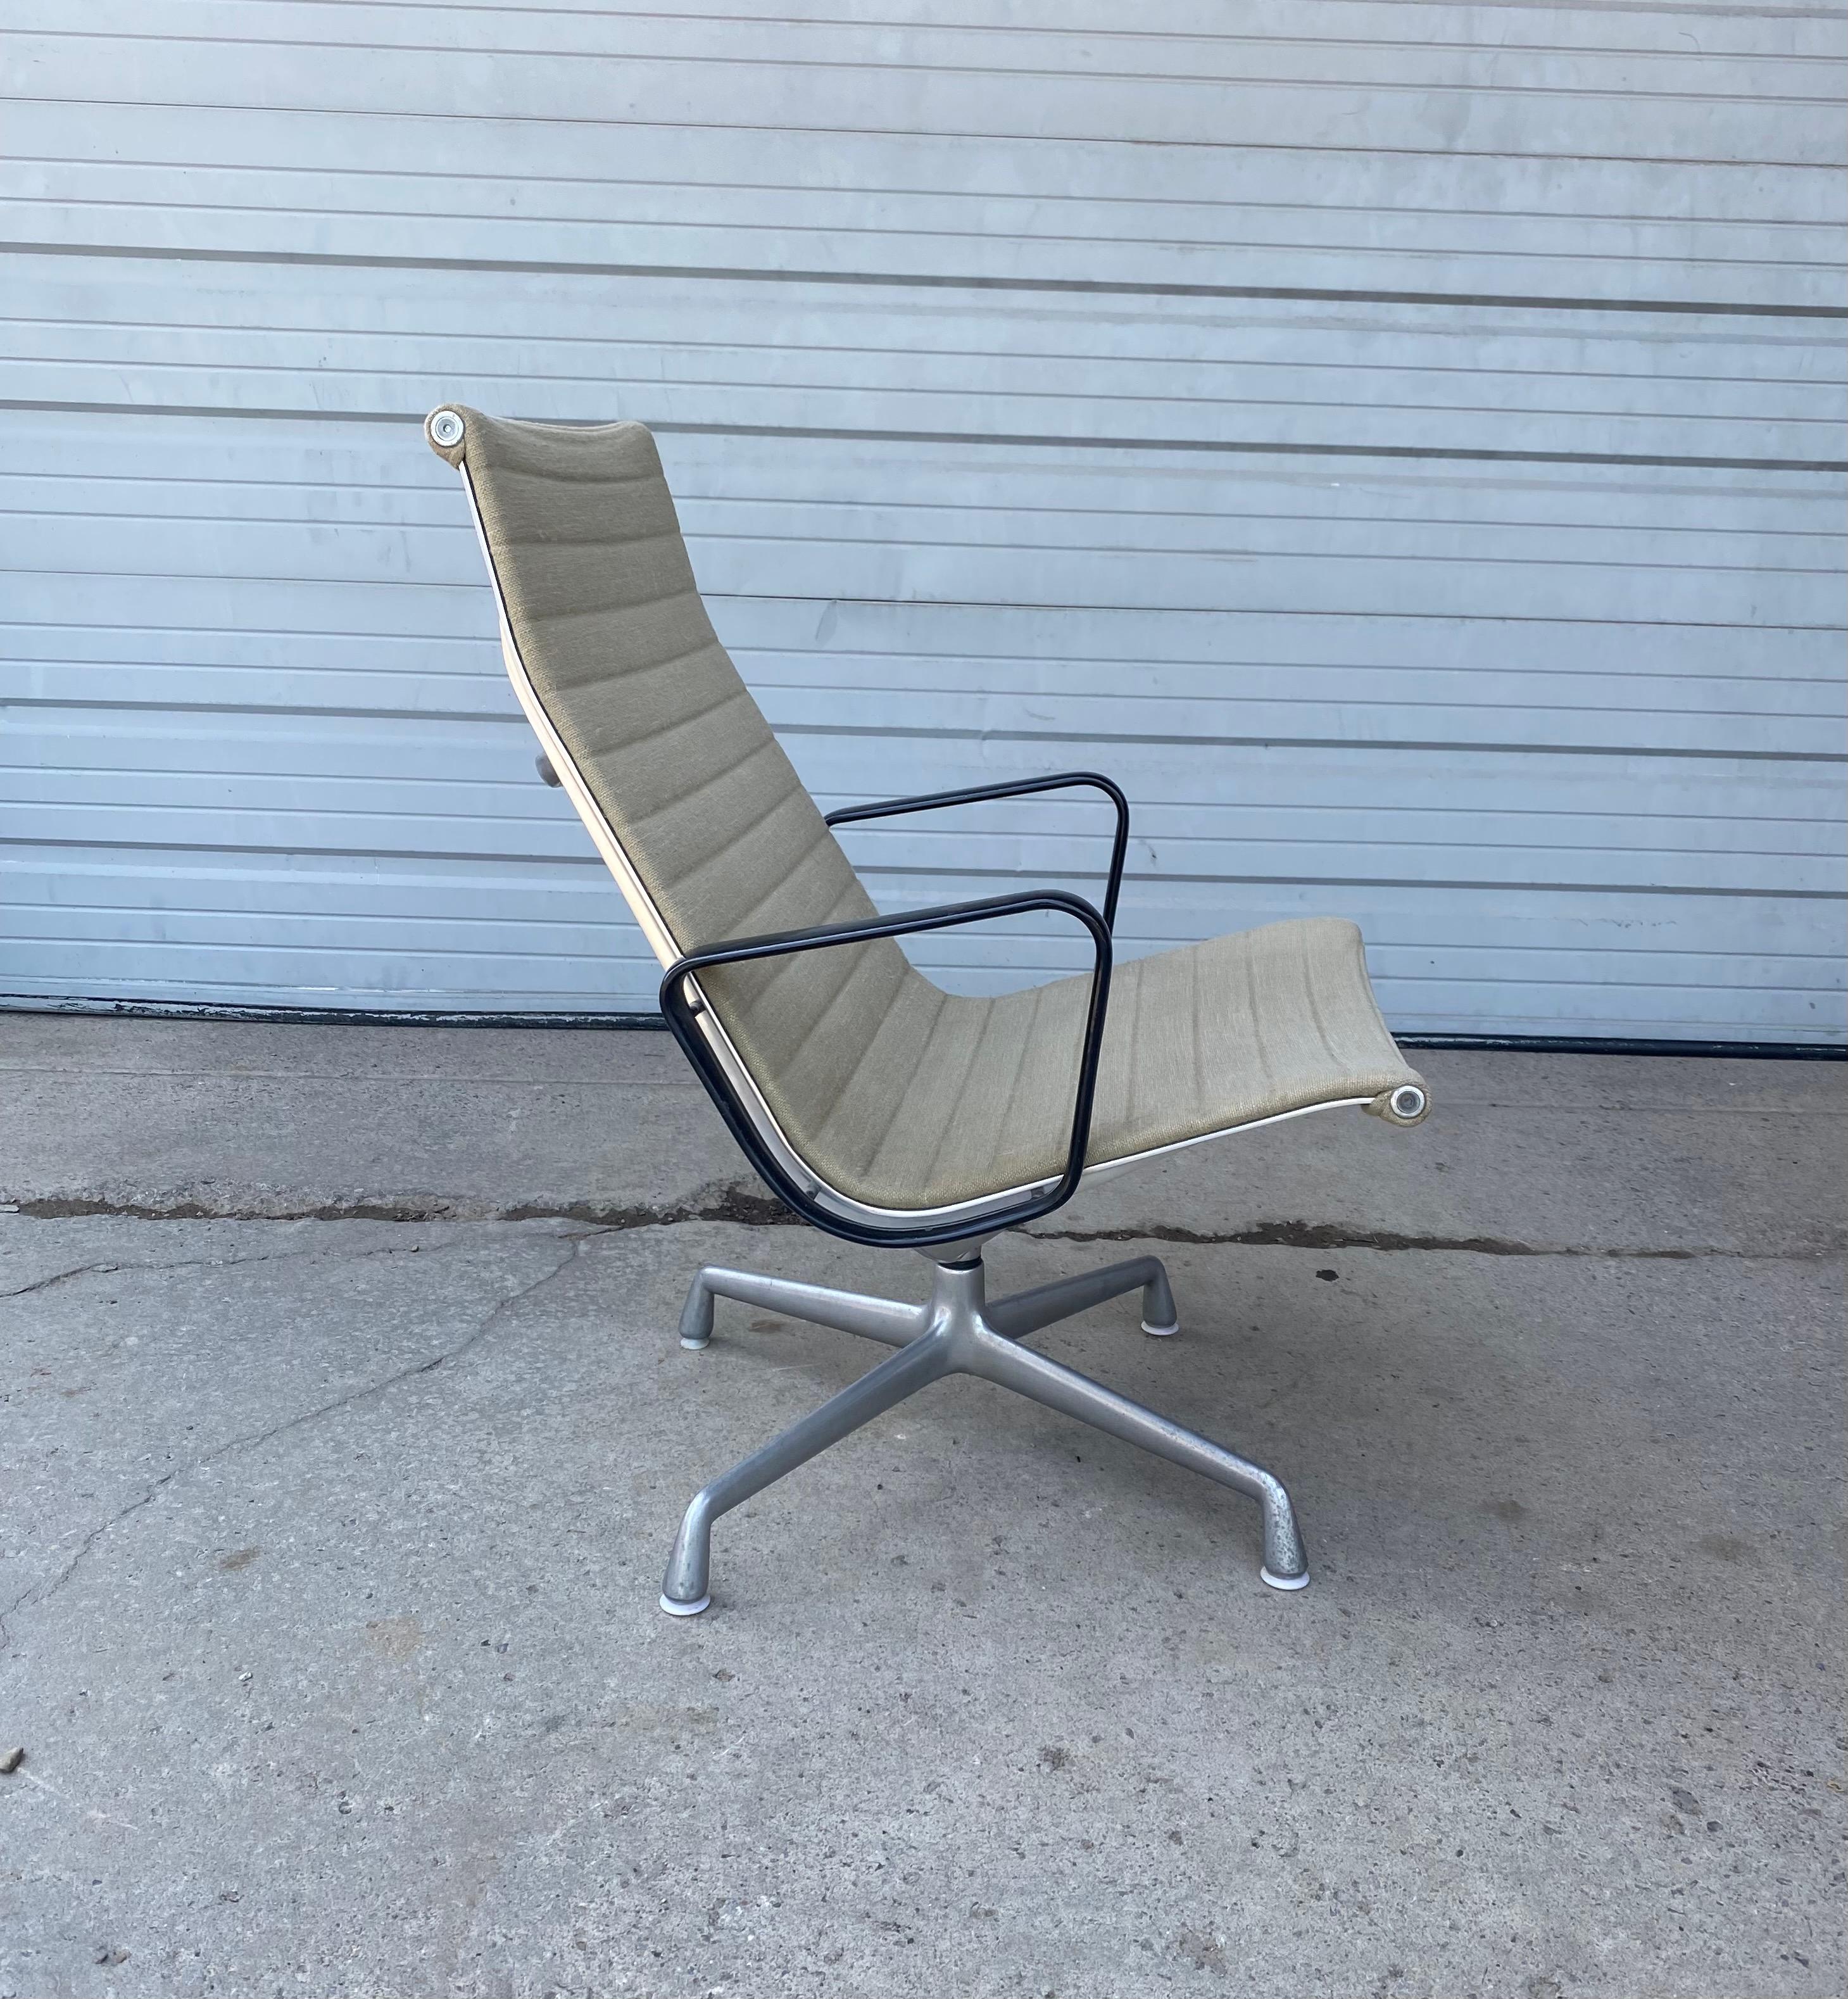 Early production Eames aluminum group lounge chair / Herman Miller,,, Four star base seldom seen black arms Retains original off white wool upholstery. Impressed Herman Miller labe. Classic Mid-Century Modernist.